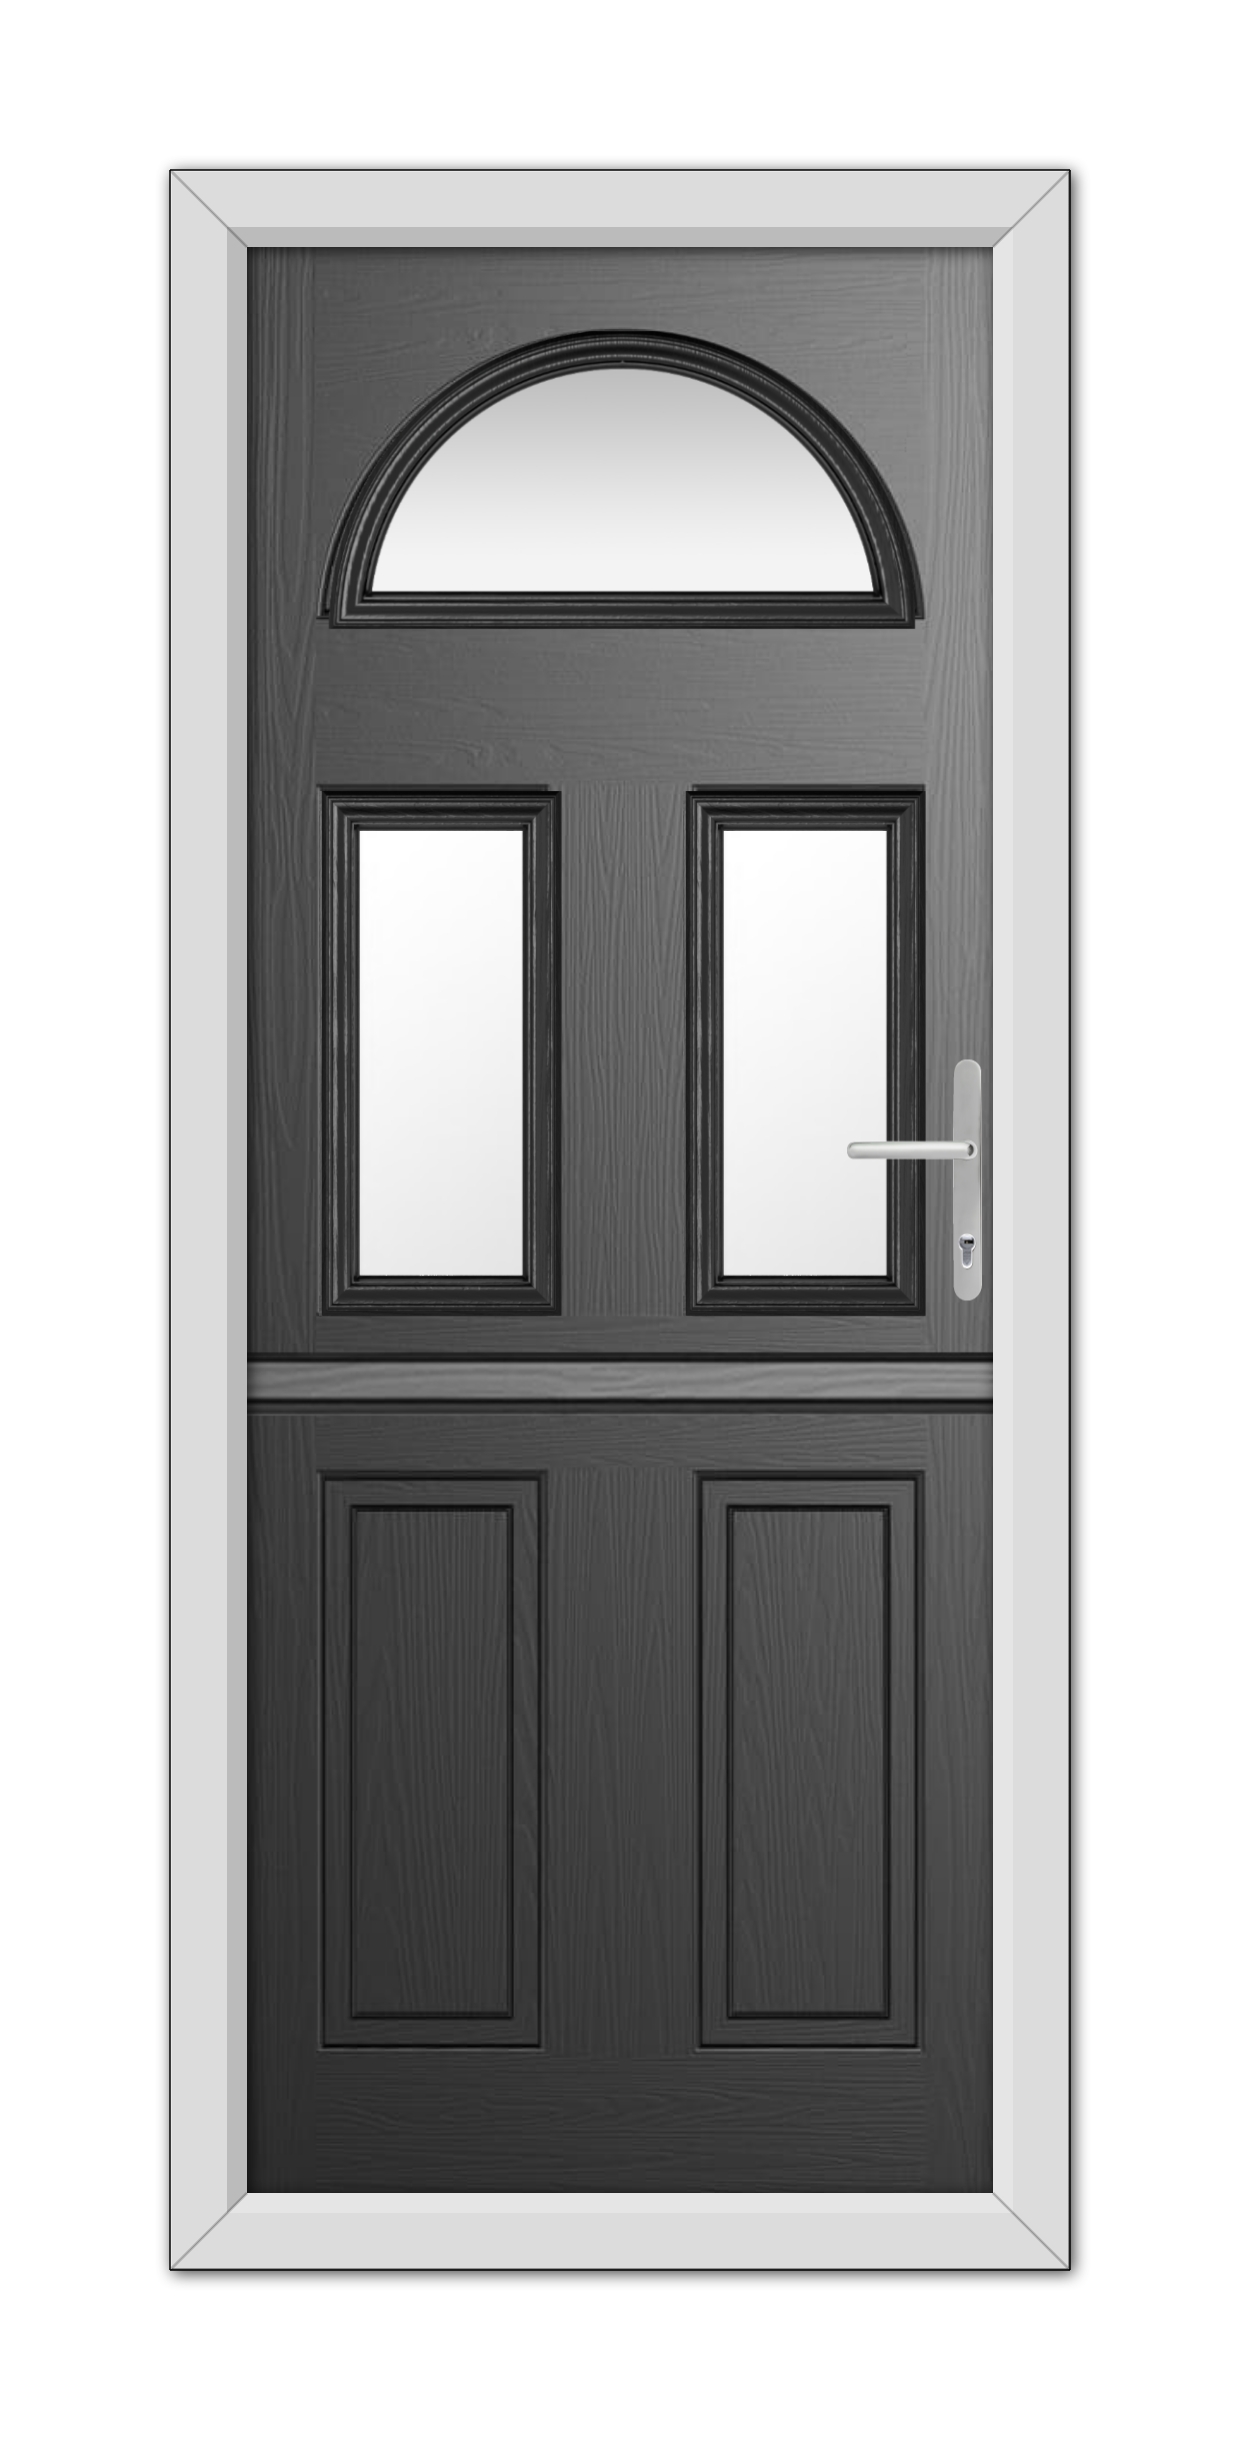 A modern Black Winslow 3 Stable Composite Door 48mm Timber Core with a semi-circular transom window and a metallic handle, set within a white frame.